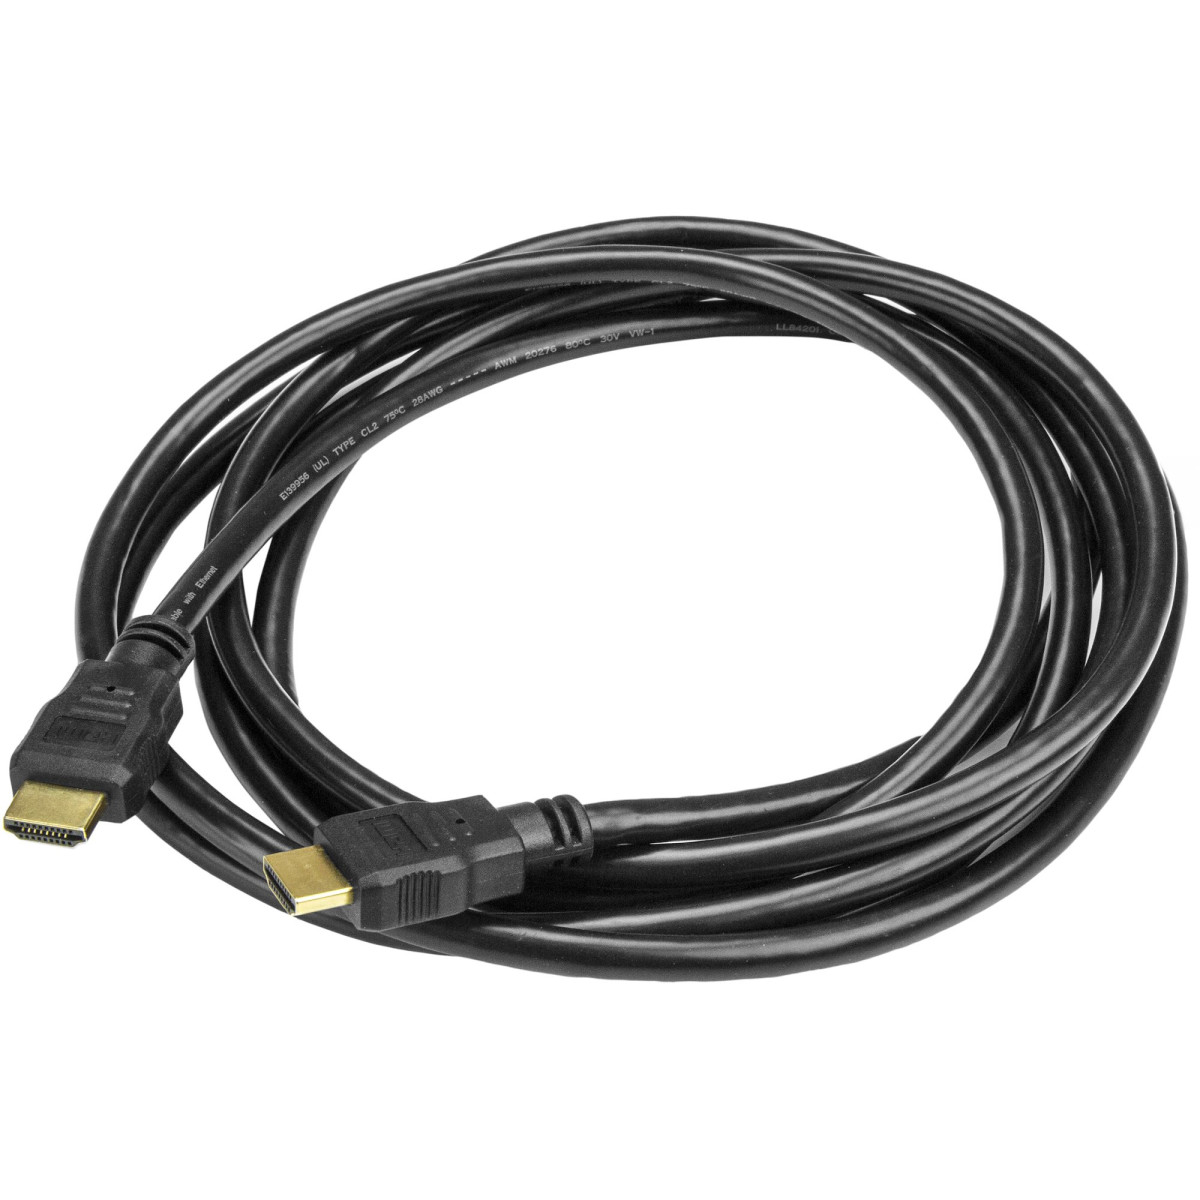 3m High Speed HDMI Cable - HDMI - M/M